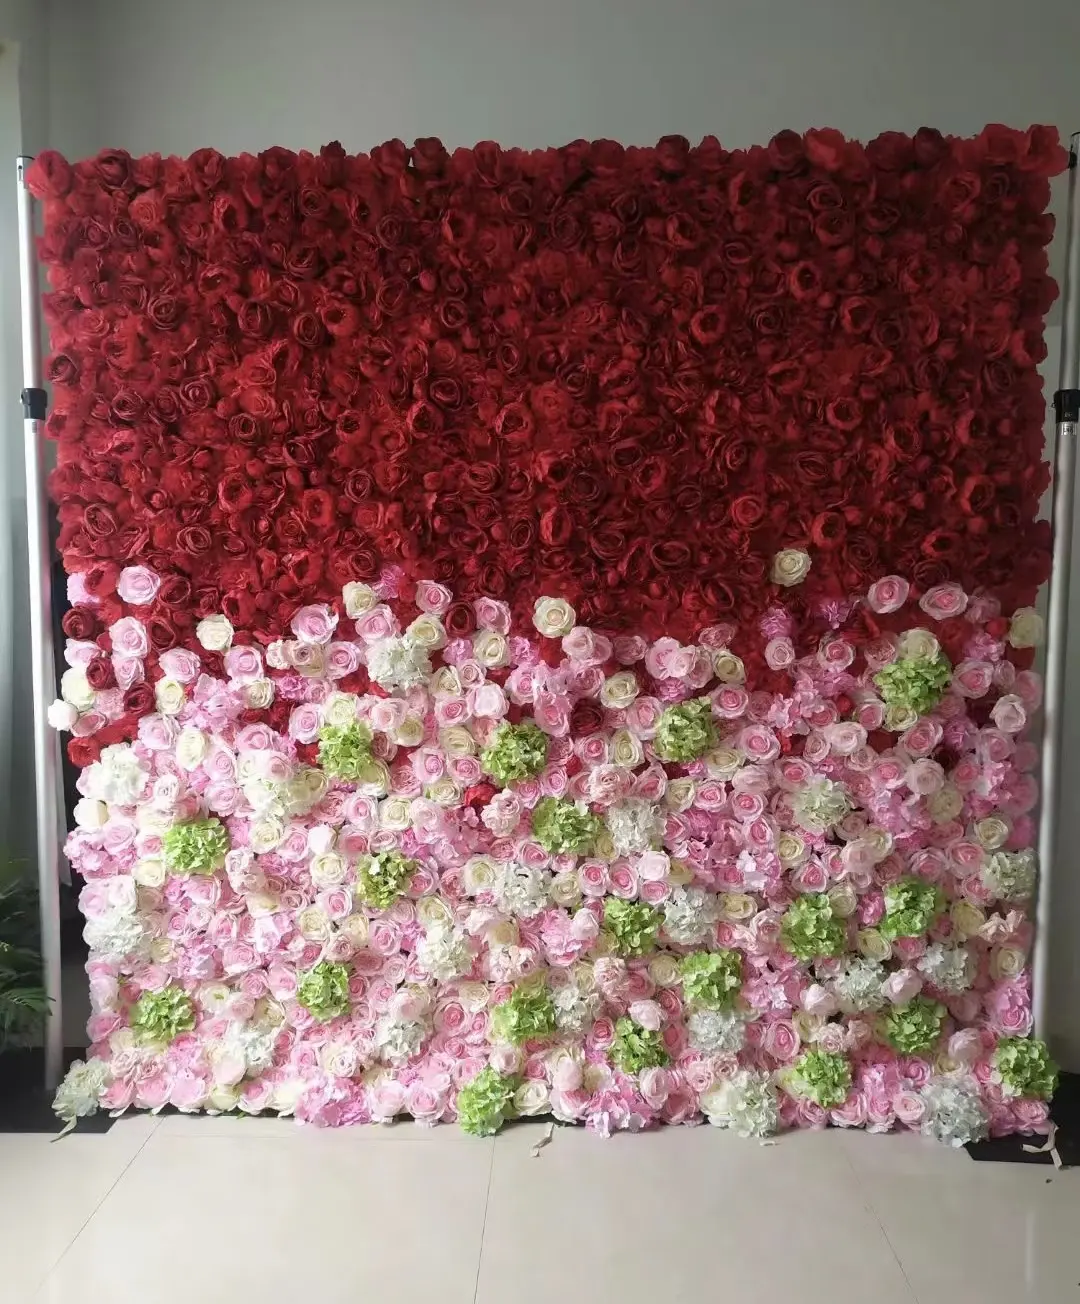 Wedding And Home Decoration Diameter 2meters Silk Rose Artificial Flower Wall Backdrop Drapes For Wedding Decoration